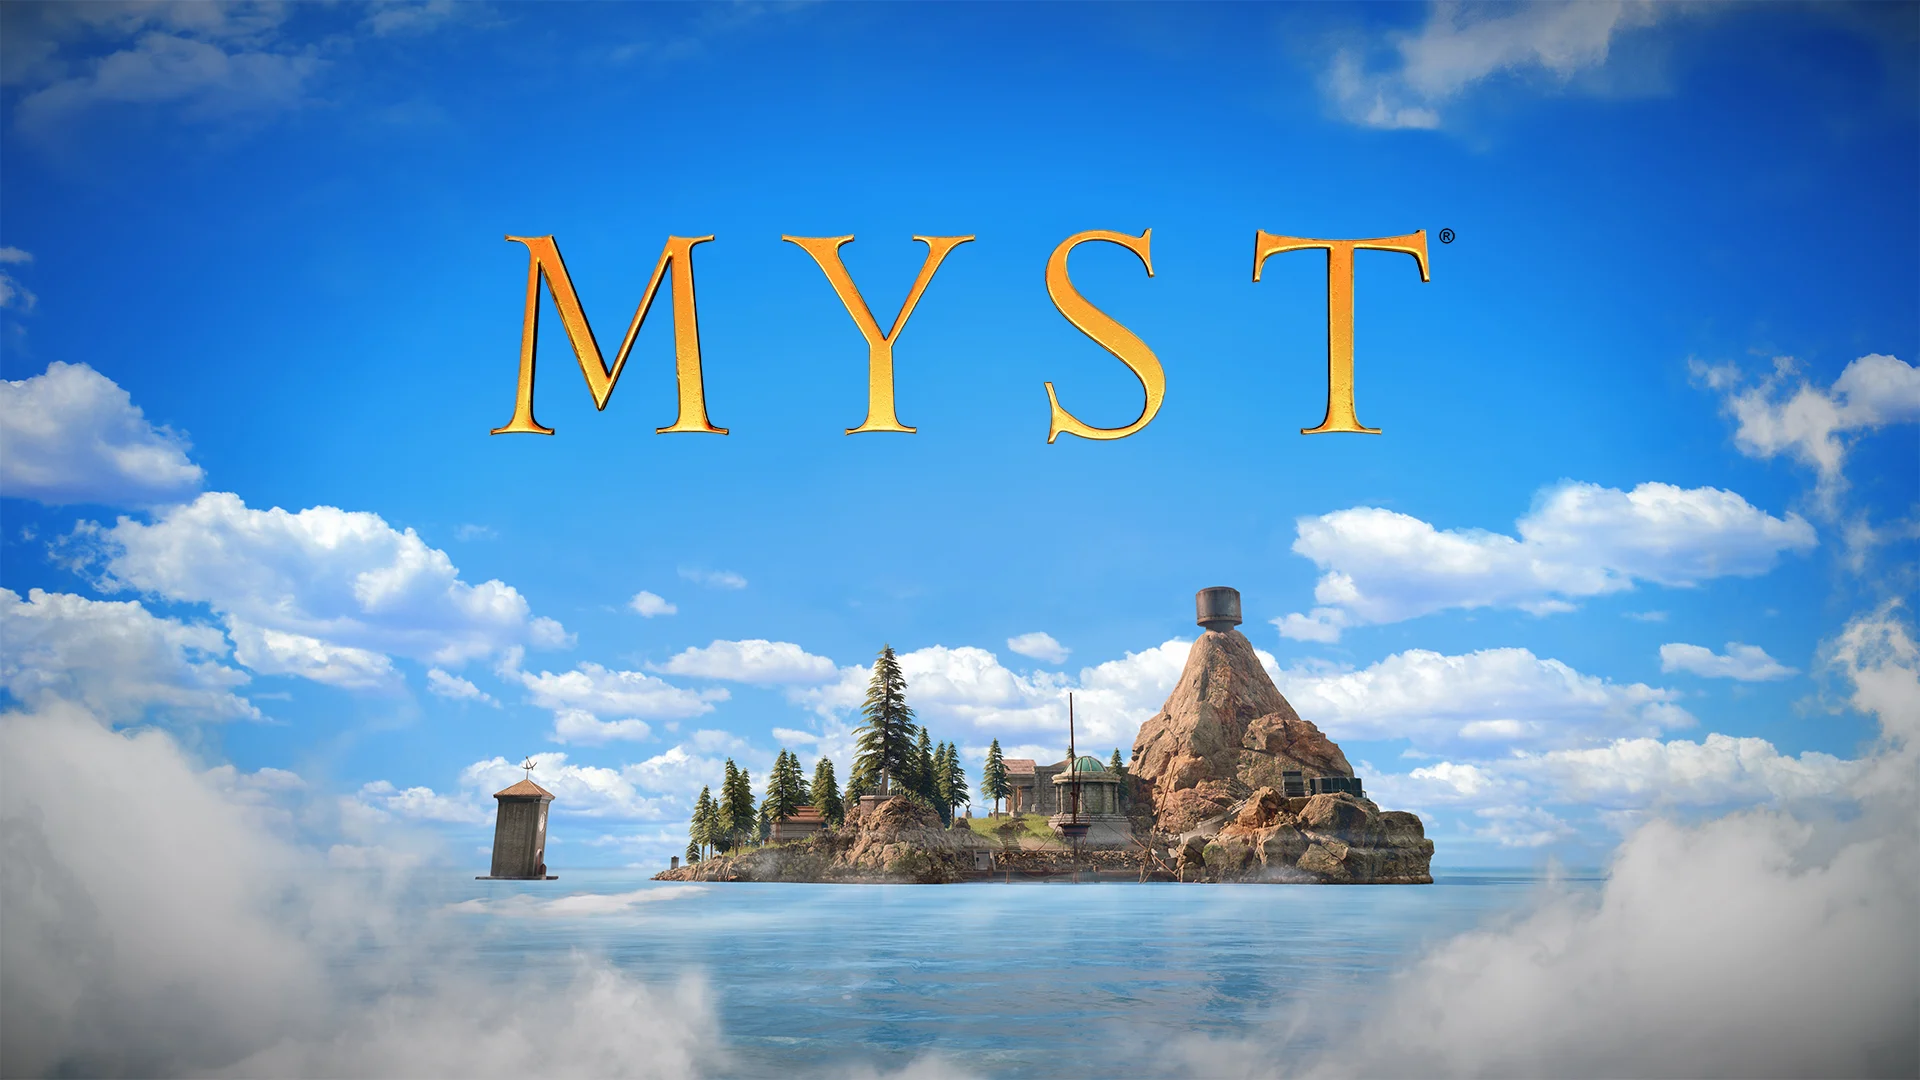 Myst Returns in AR for the PC and Oculus Quest